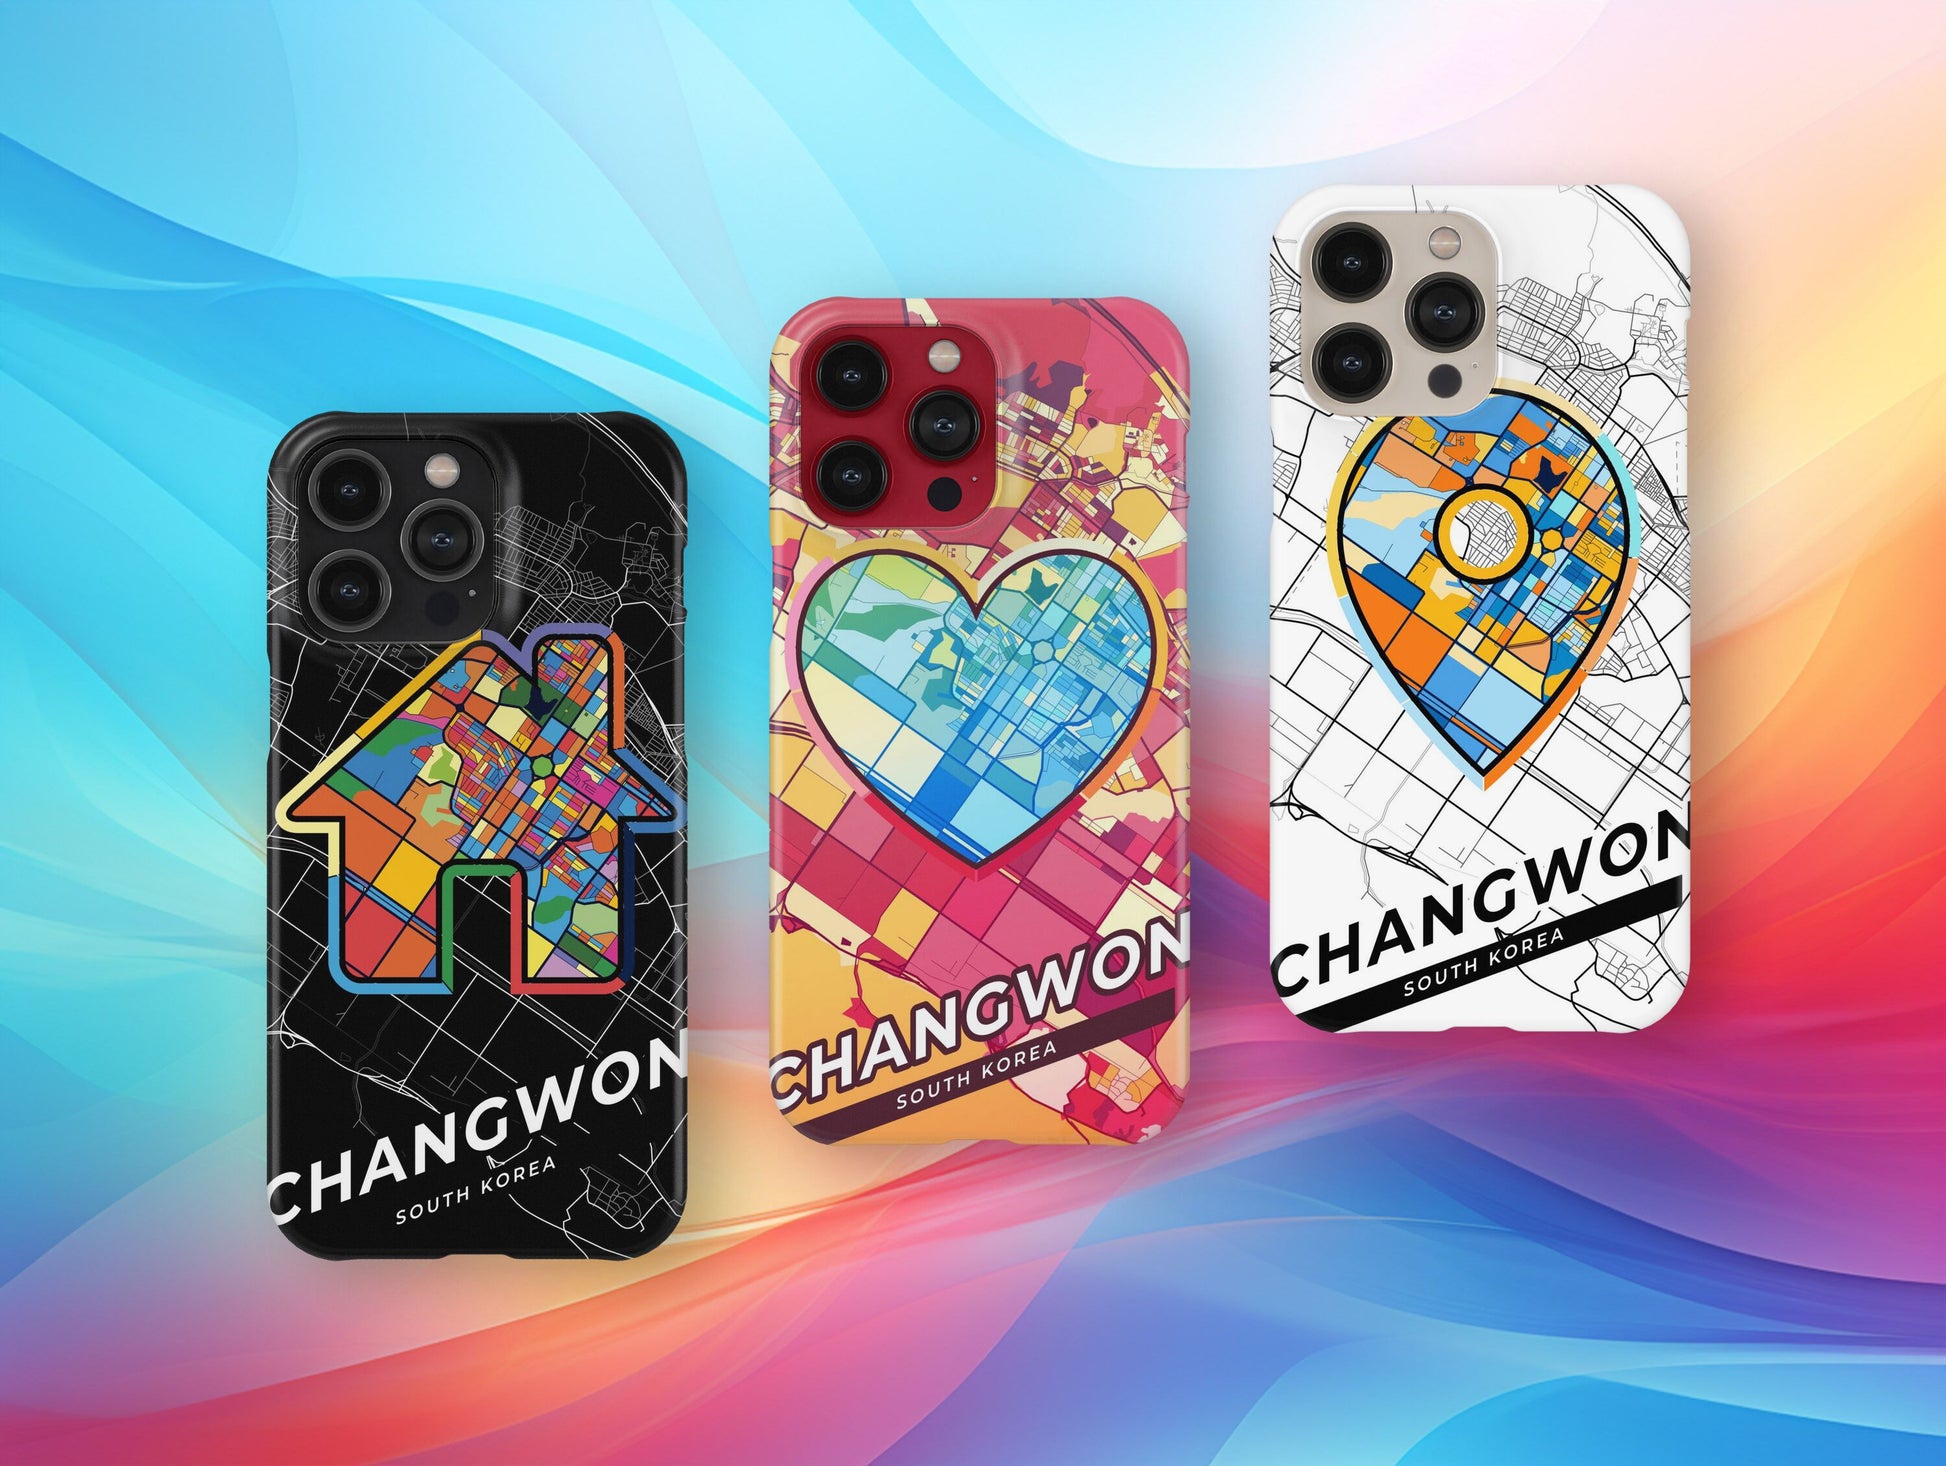 Changwon South Korea slim phone case with colorful icon. Birthday, wedding or housewarming gift. Couple match cases.